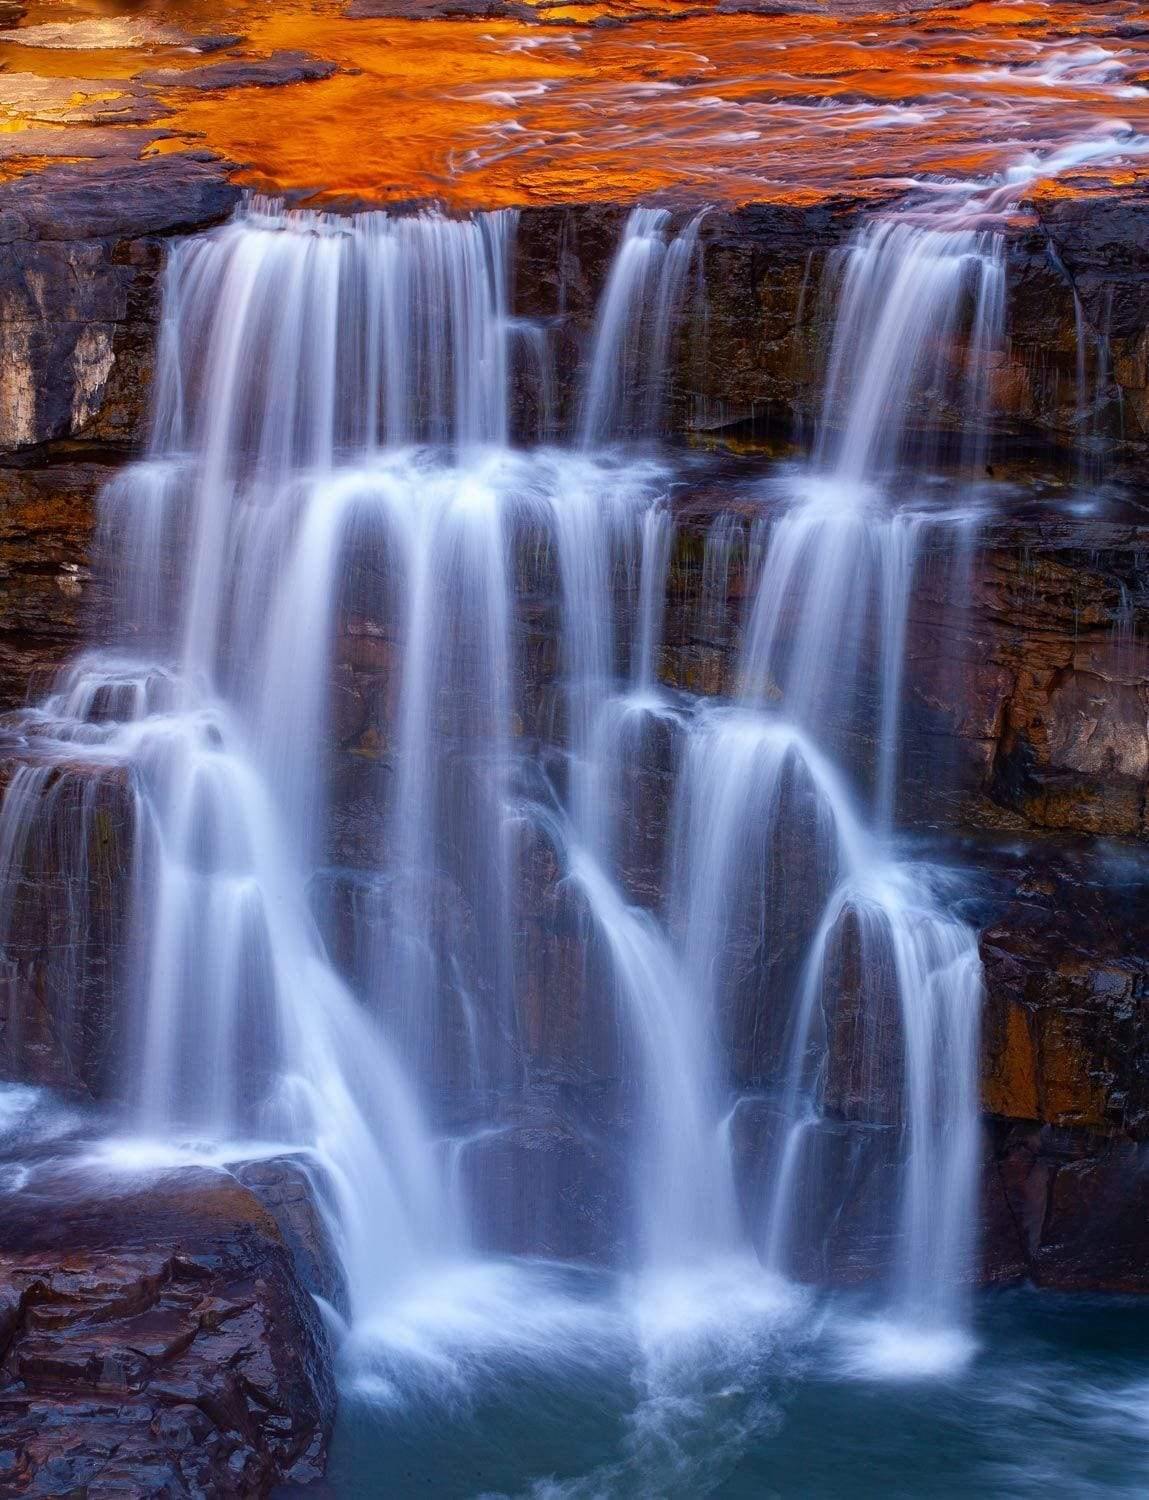 Wide waterfalls from a mountain wall into a lake, Mitchell Falls Cascades, The Kimberley, Western Australia